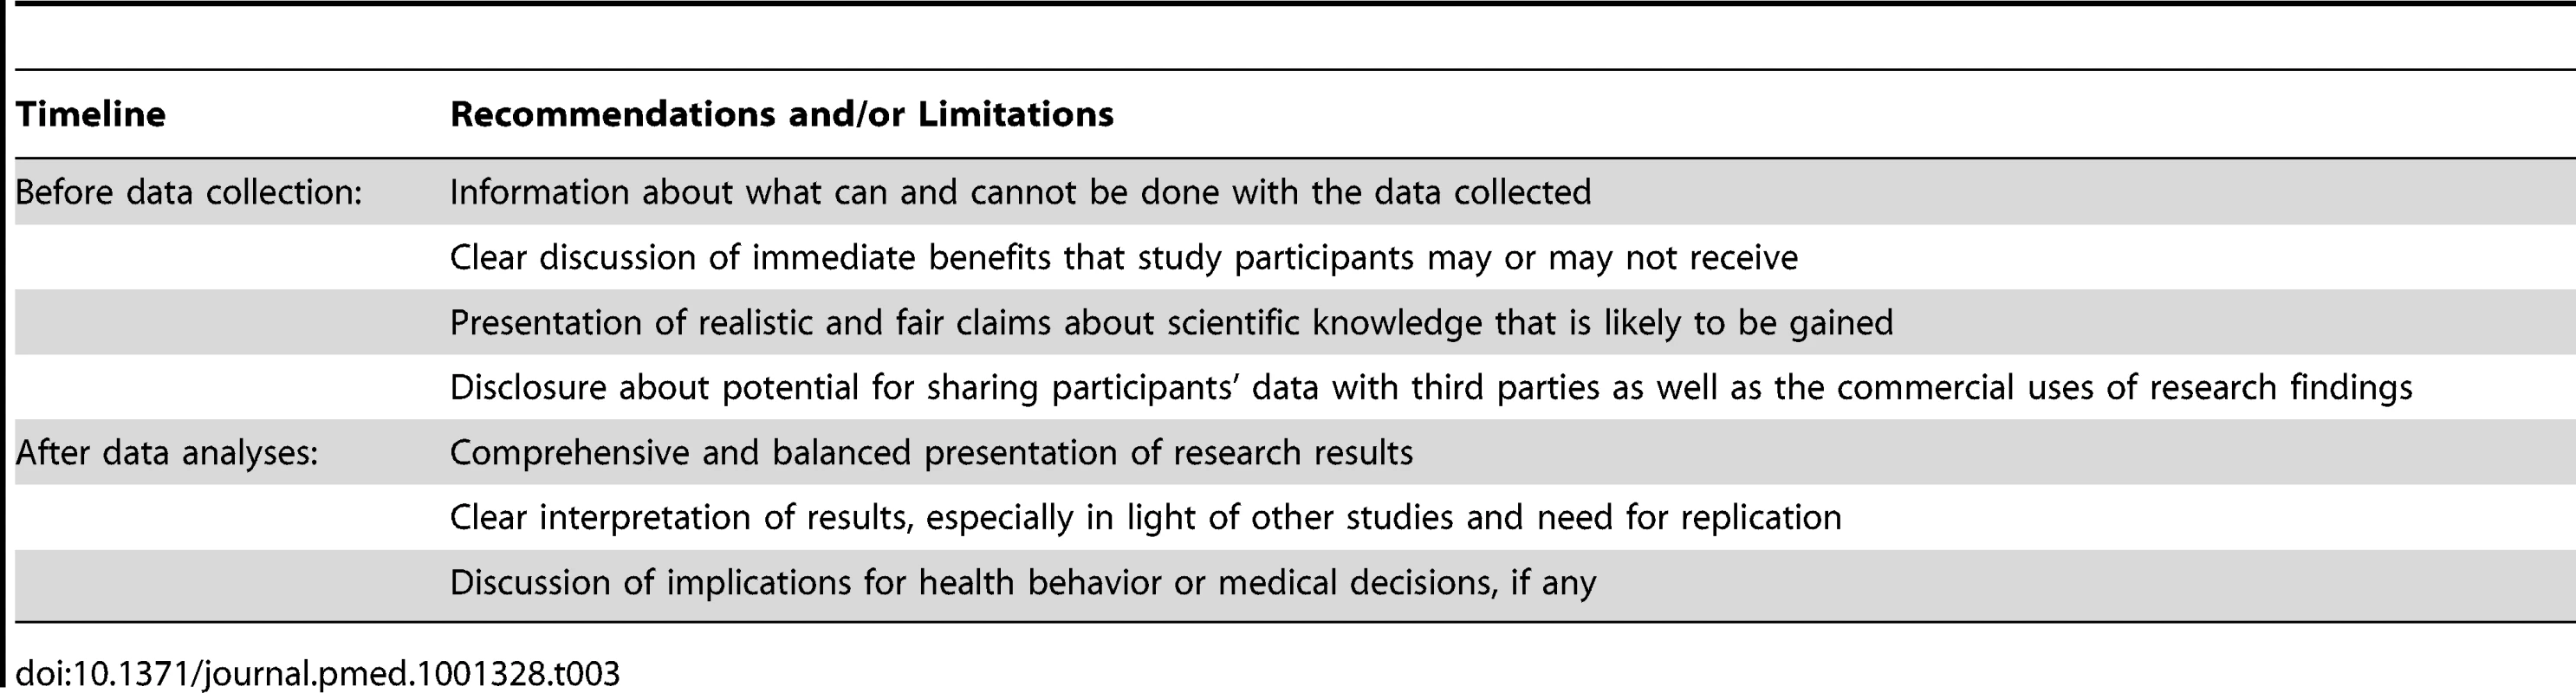 Recommendations for communicating opportunities and limitations of research conducted using data obtained through online communities.